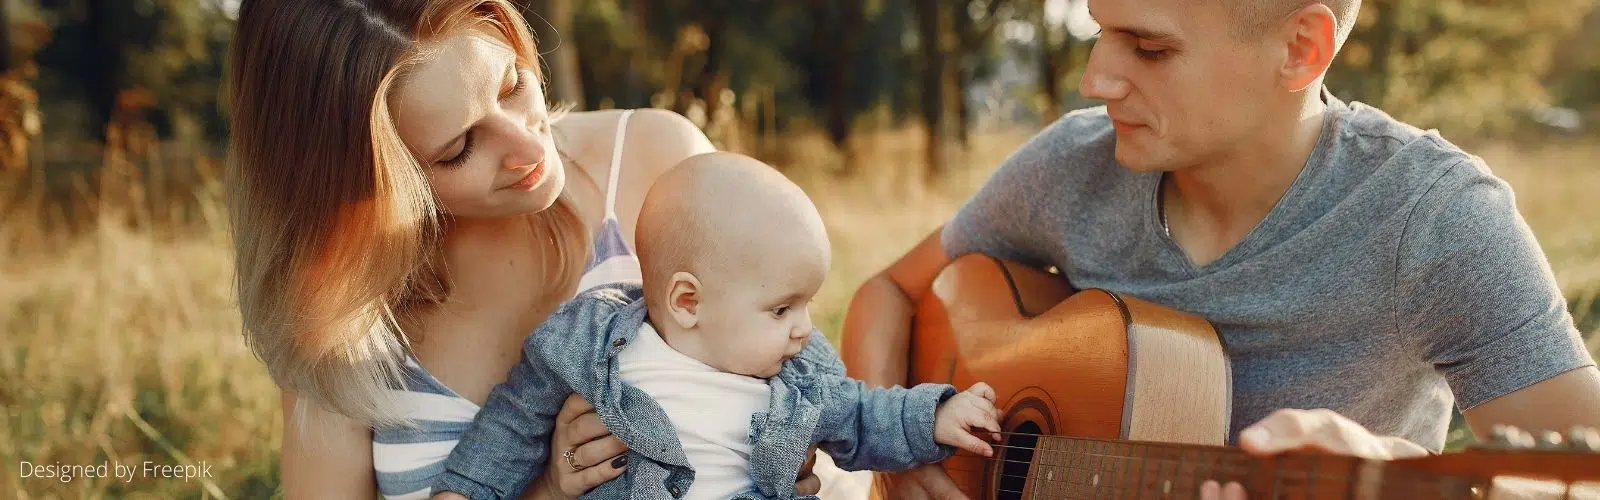 Musical awakening: make children love music from a young age!